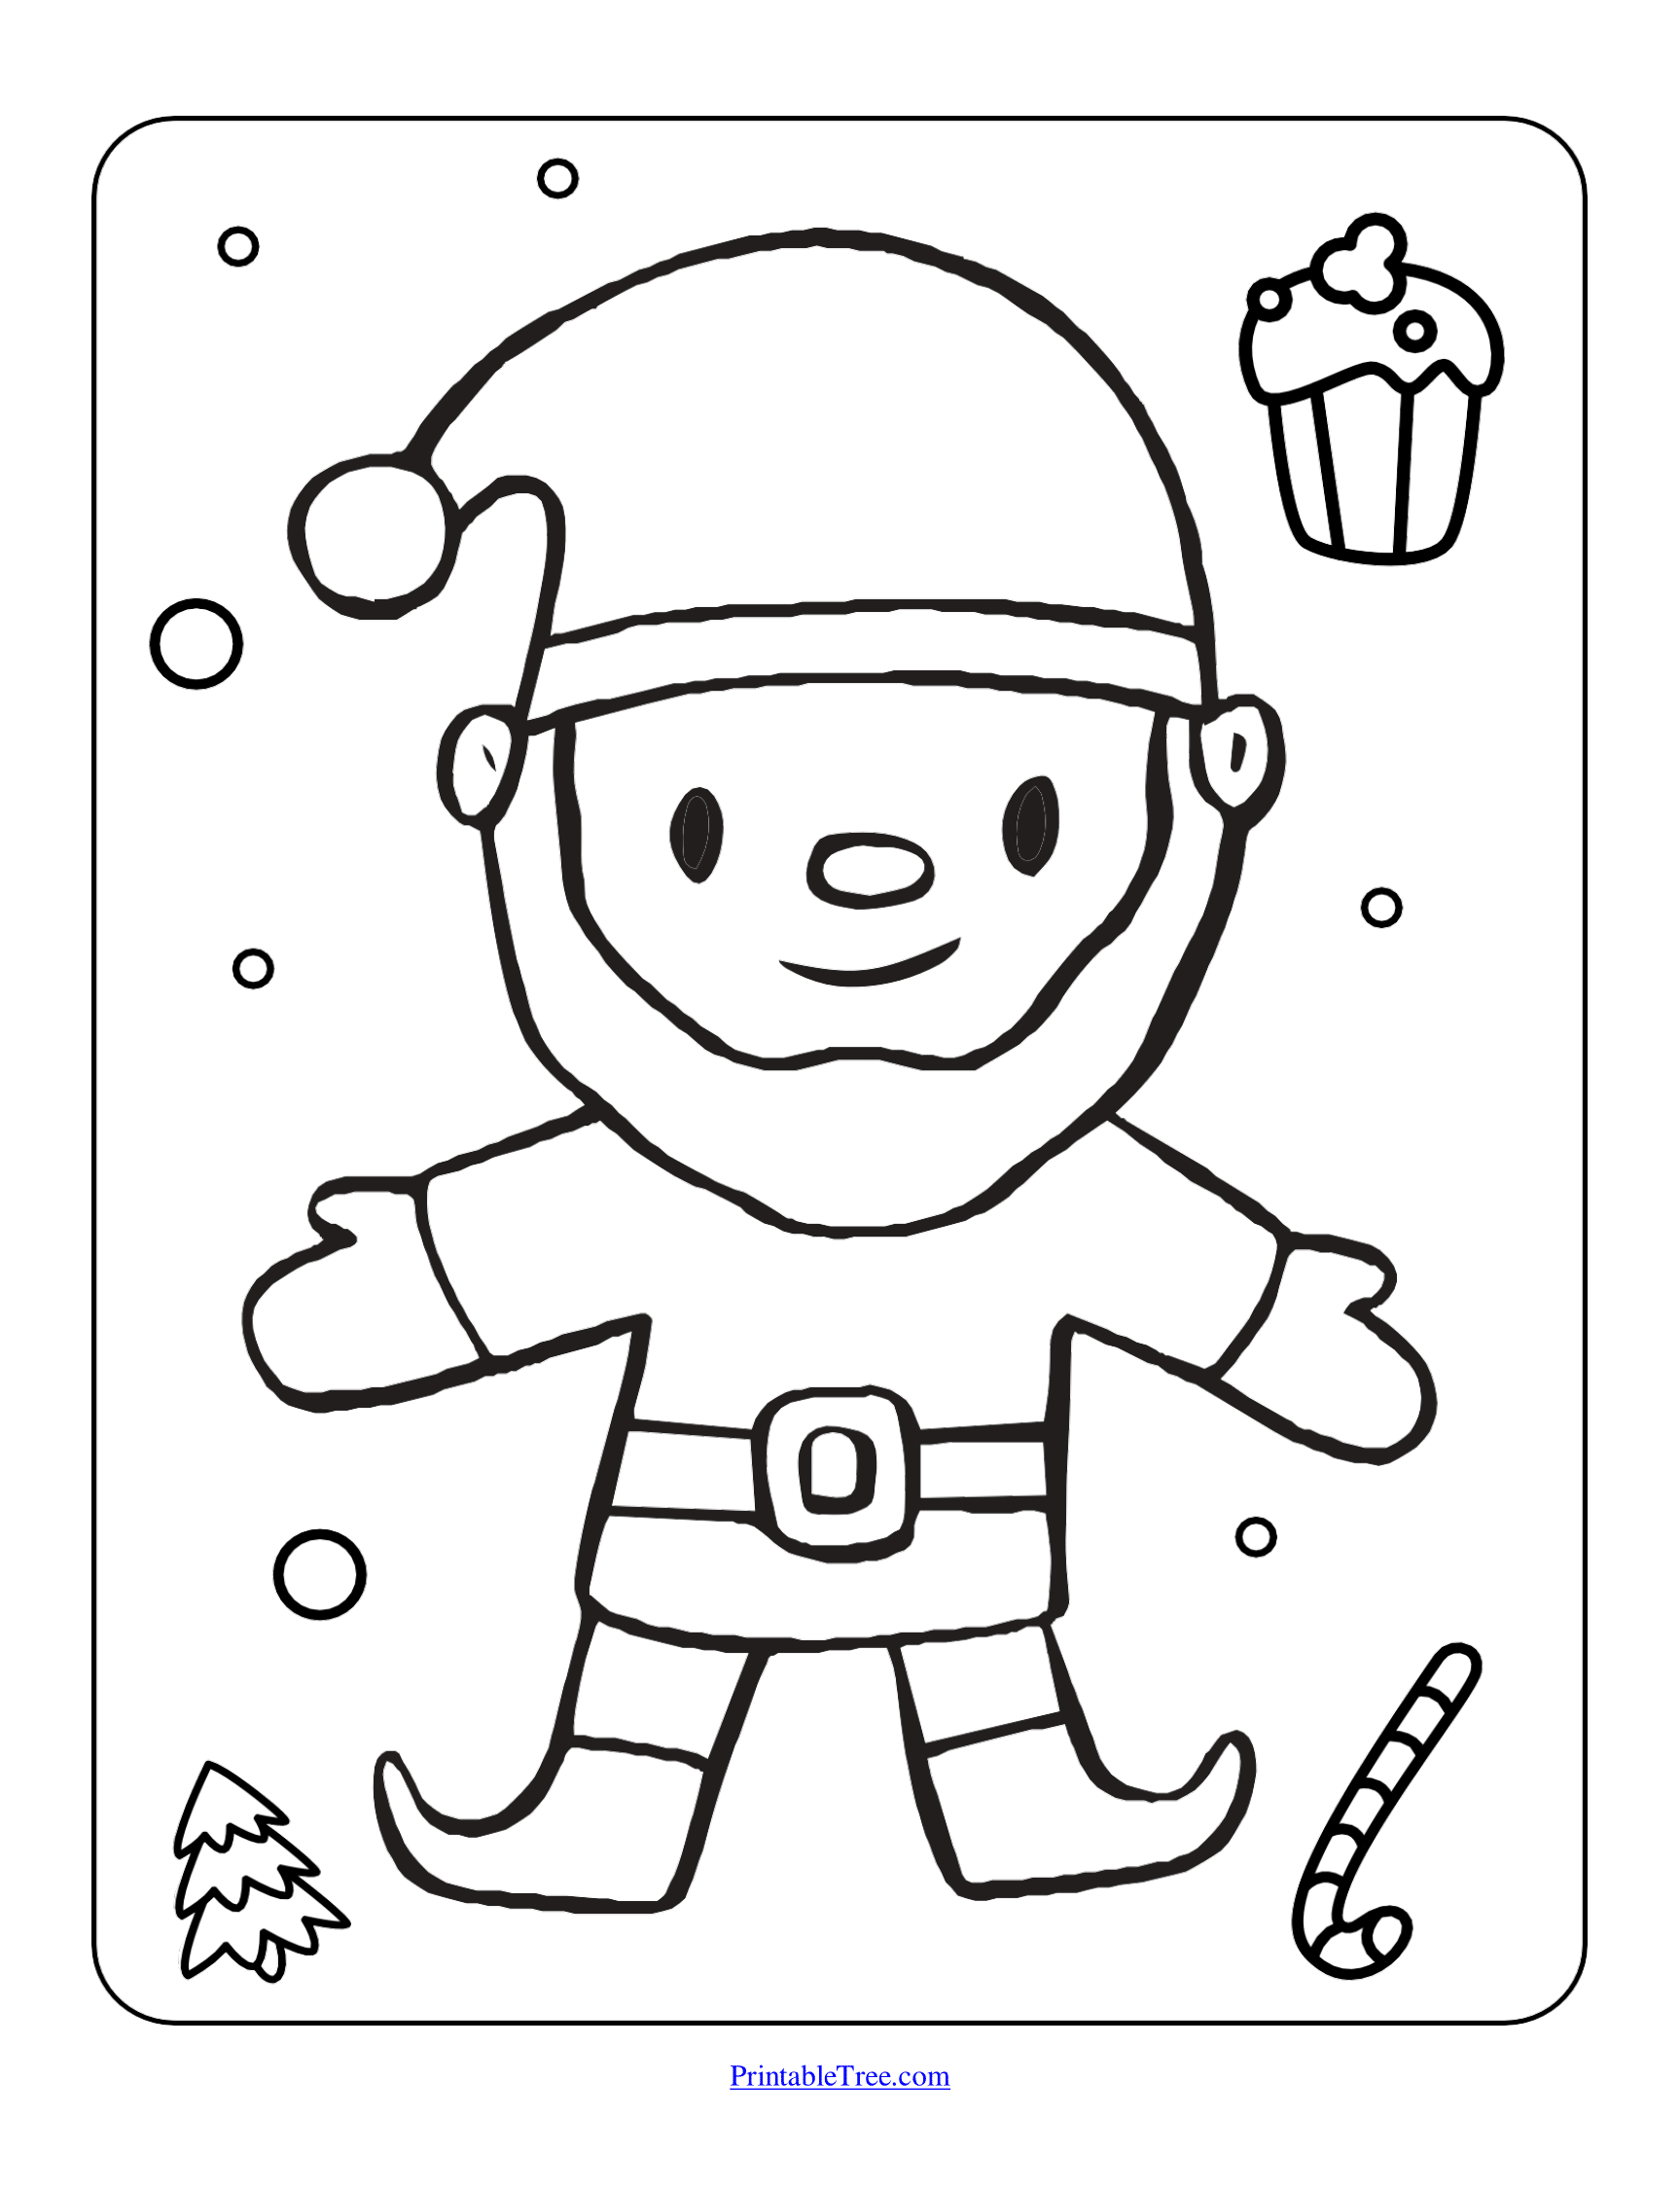 Free printable christmas coloring pages pdf for kids and adults